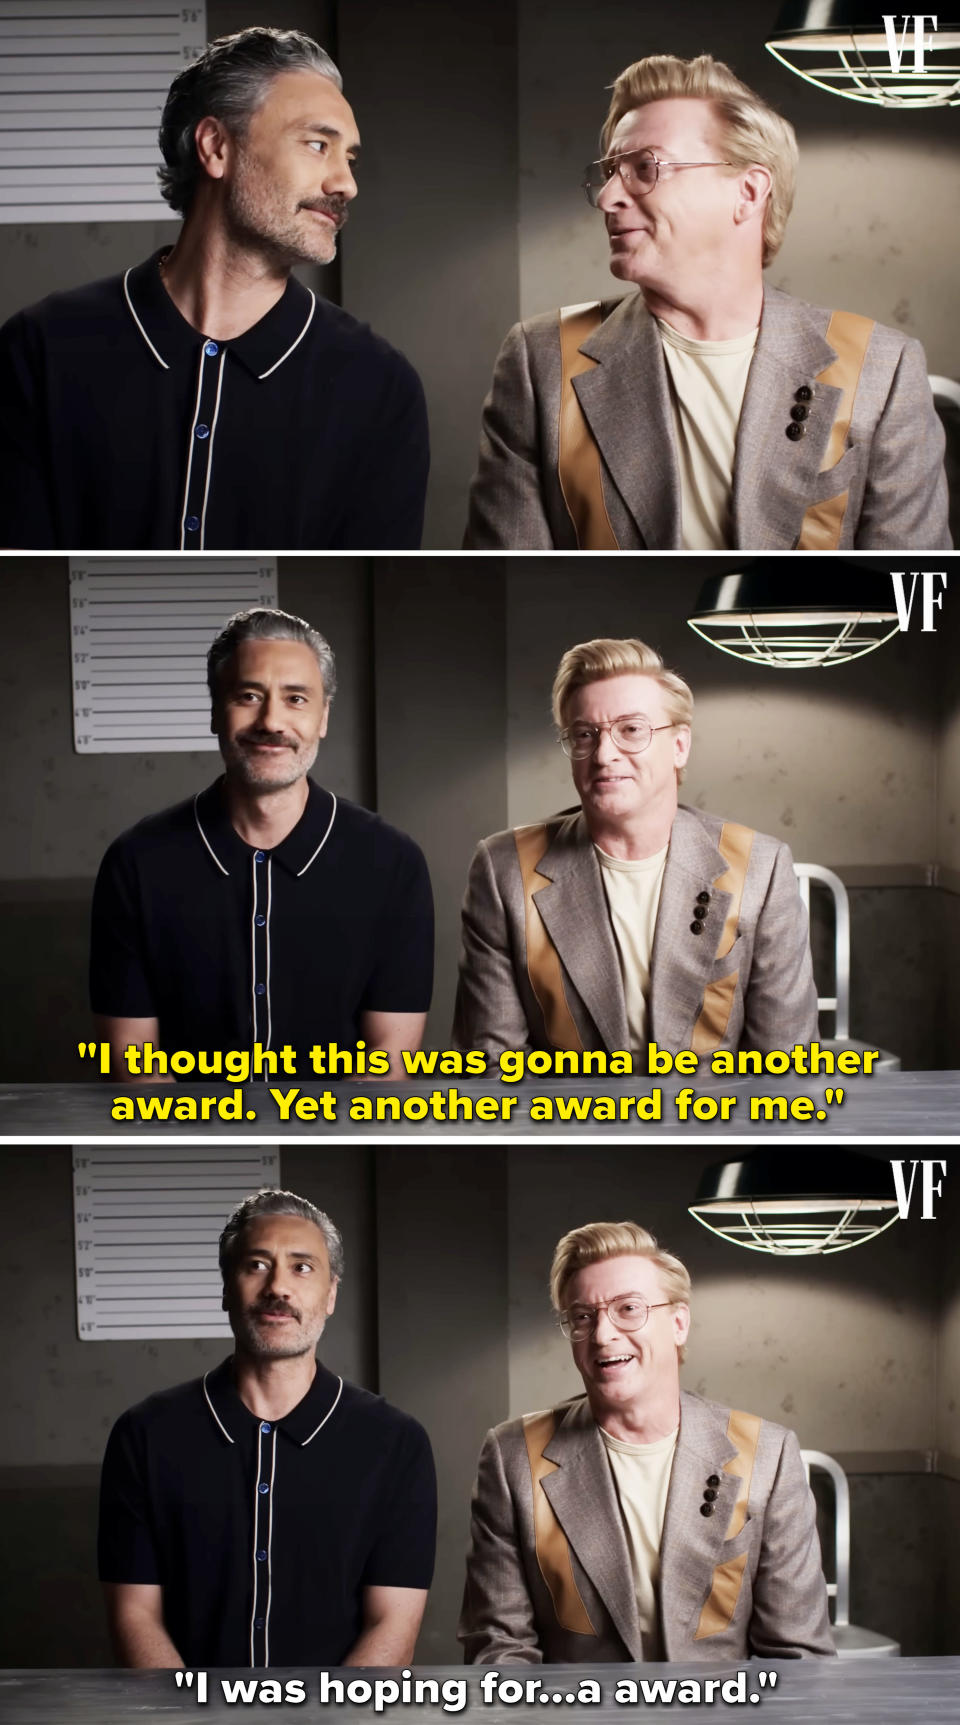 Taika and Rhys being interviewed